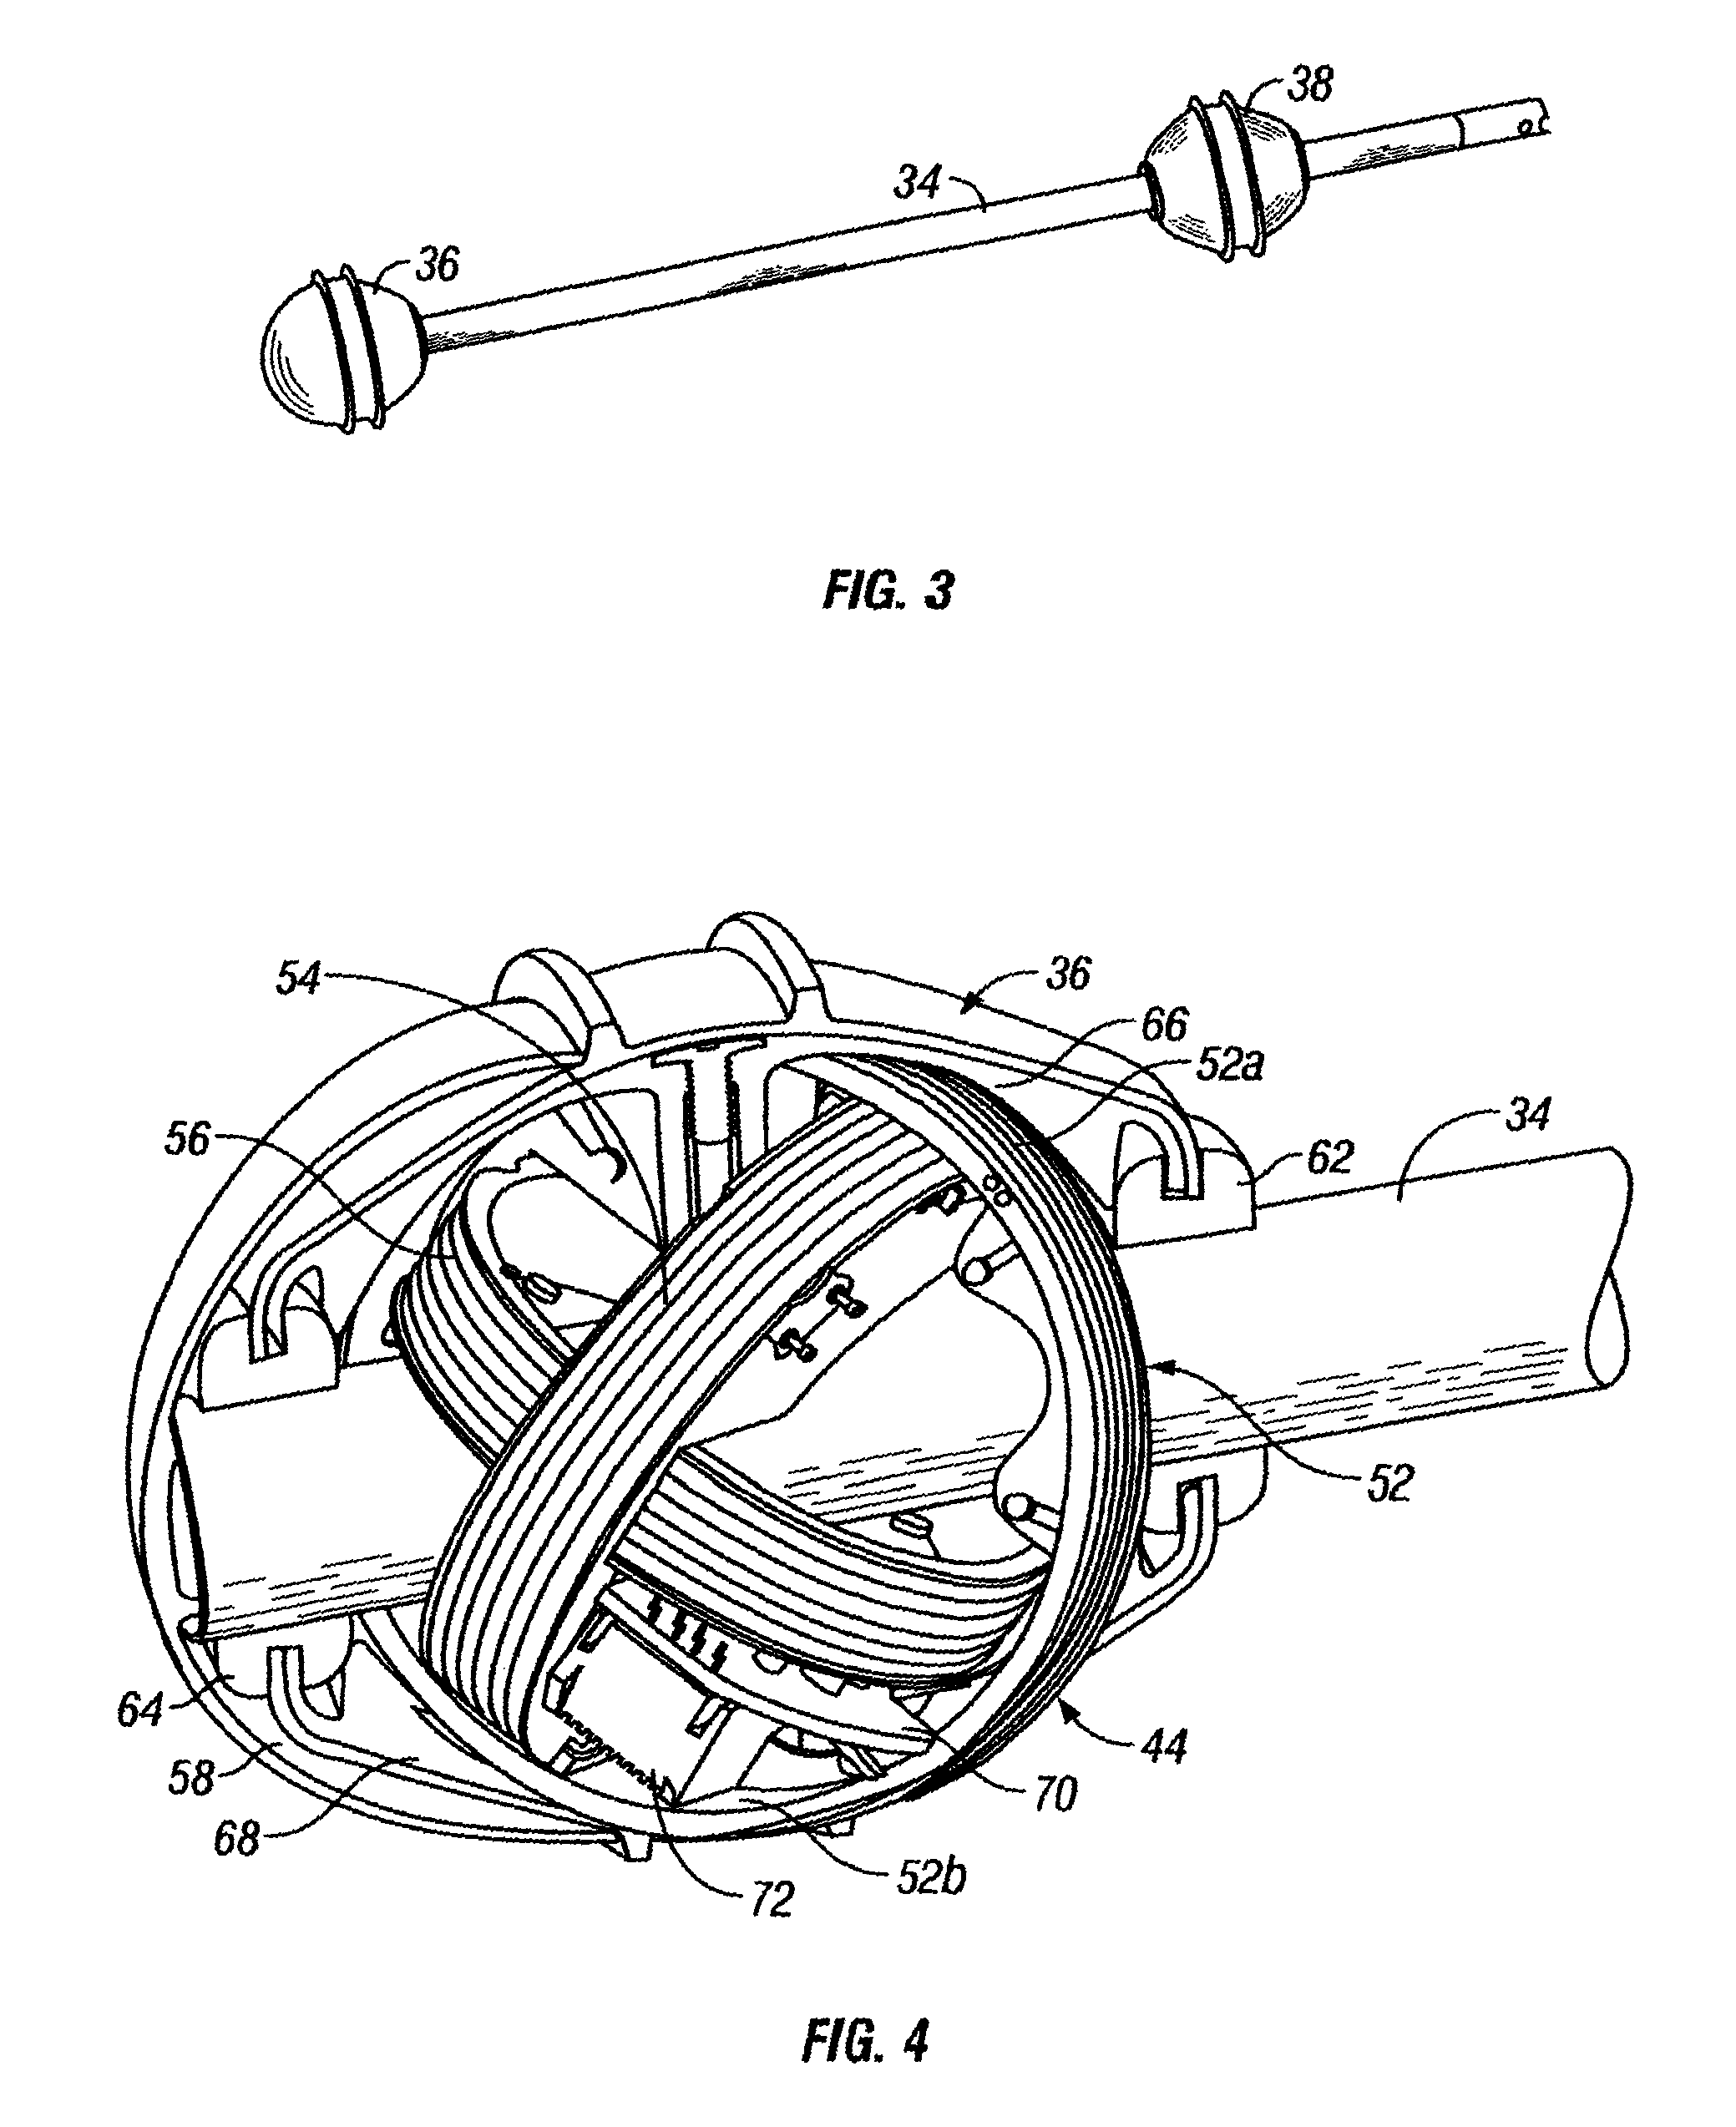 Underground utility locator with a transmitter, a pair of upwardly opening pockets and helical coil type electrical cords